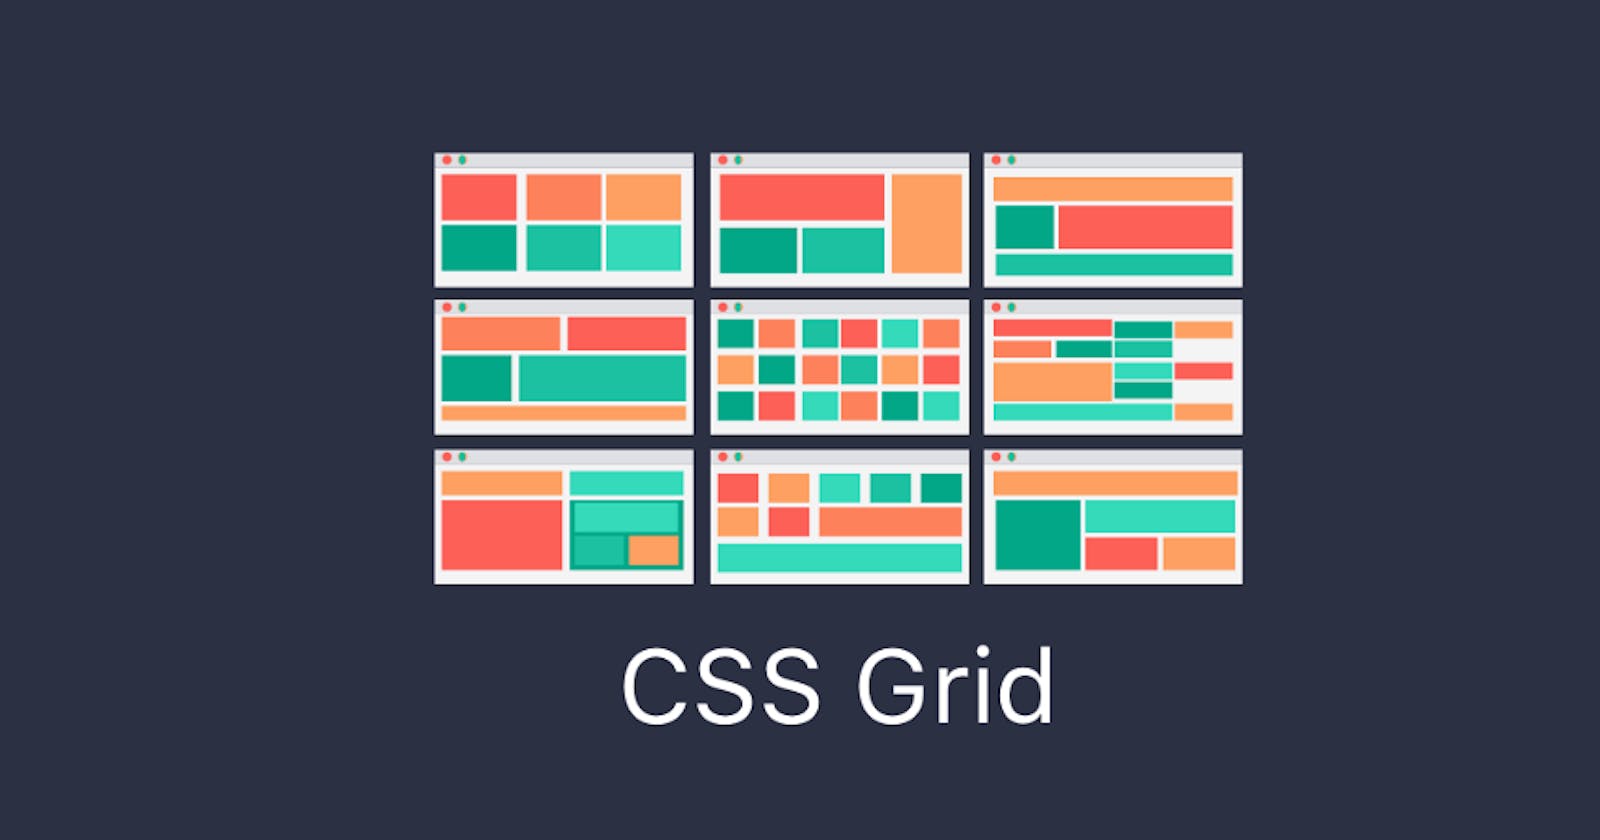 CSS Grid layout